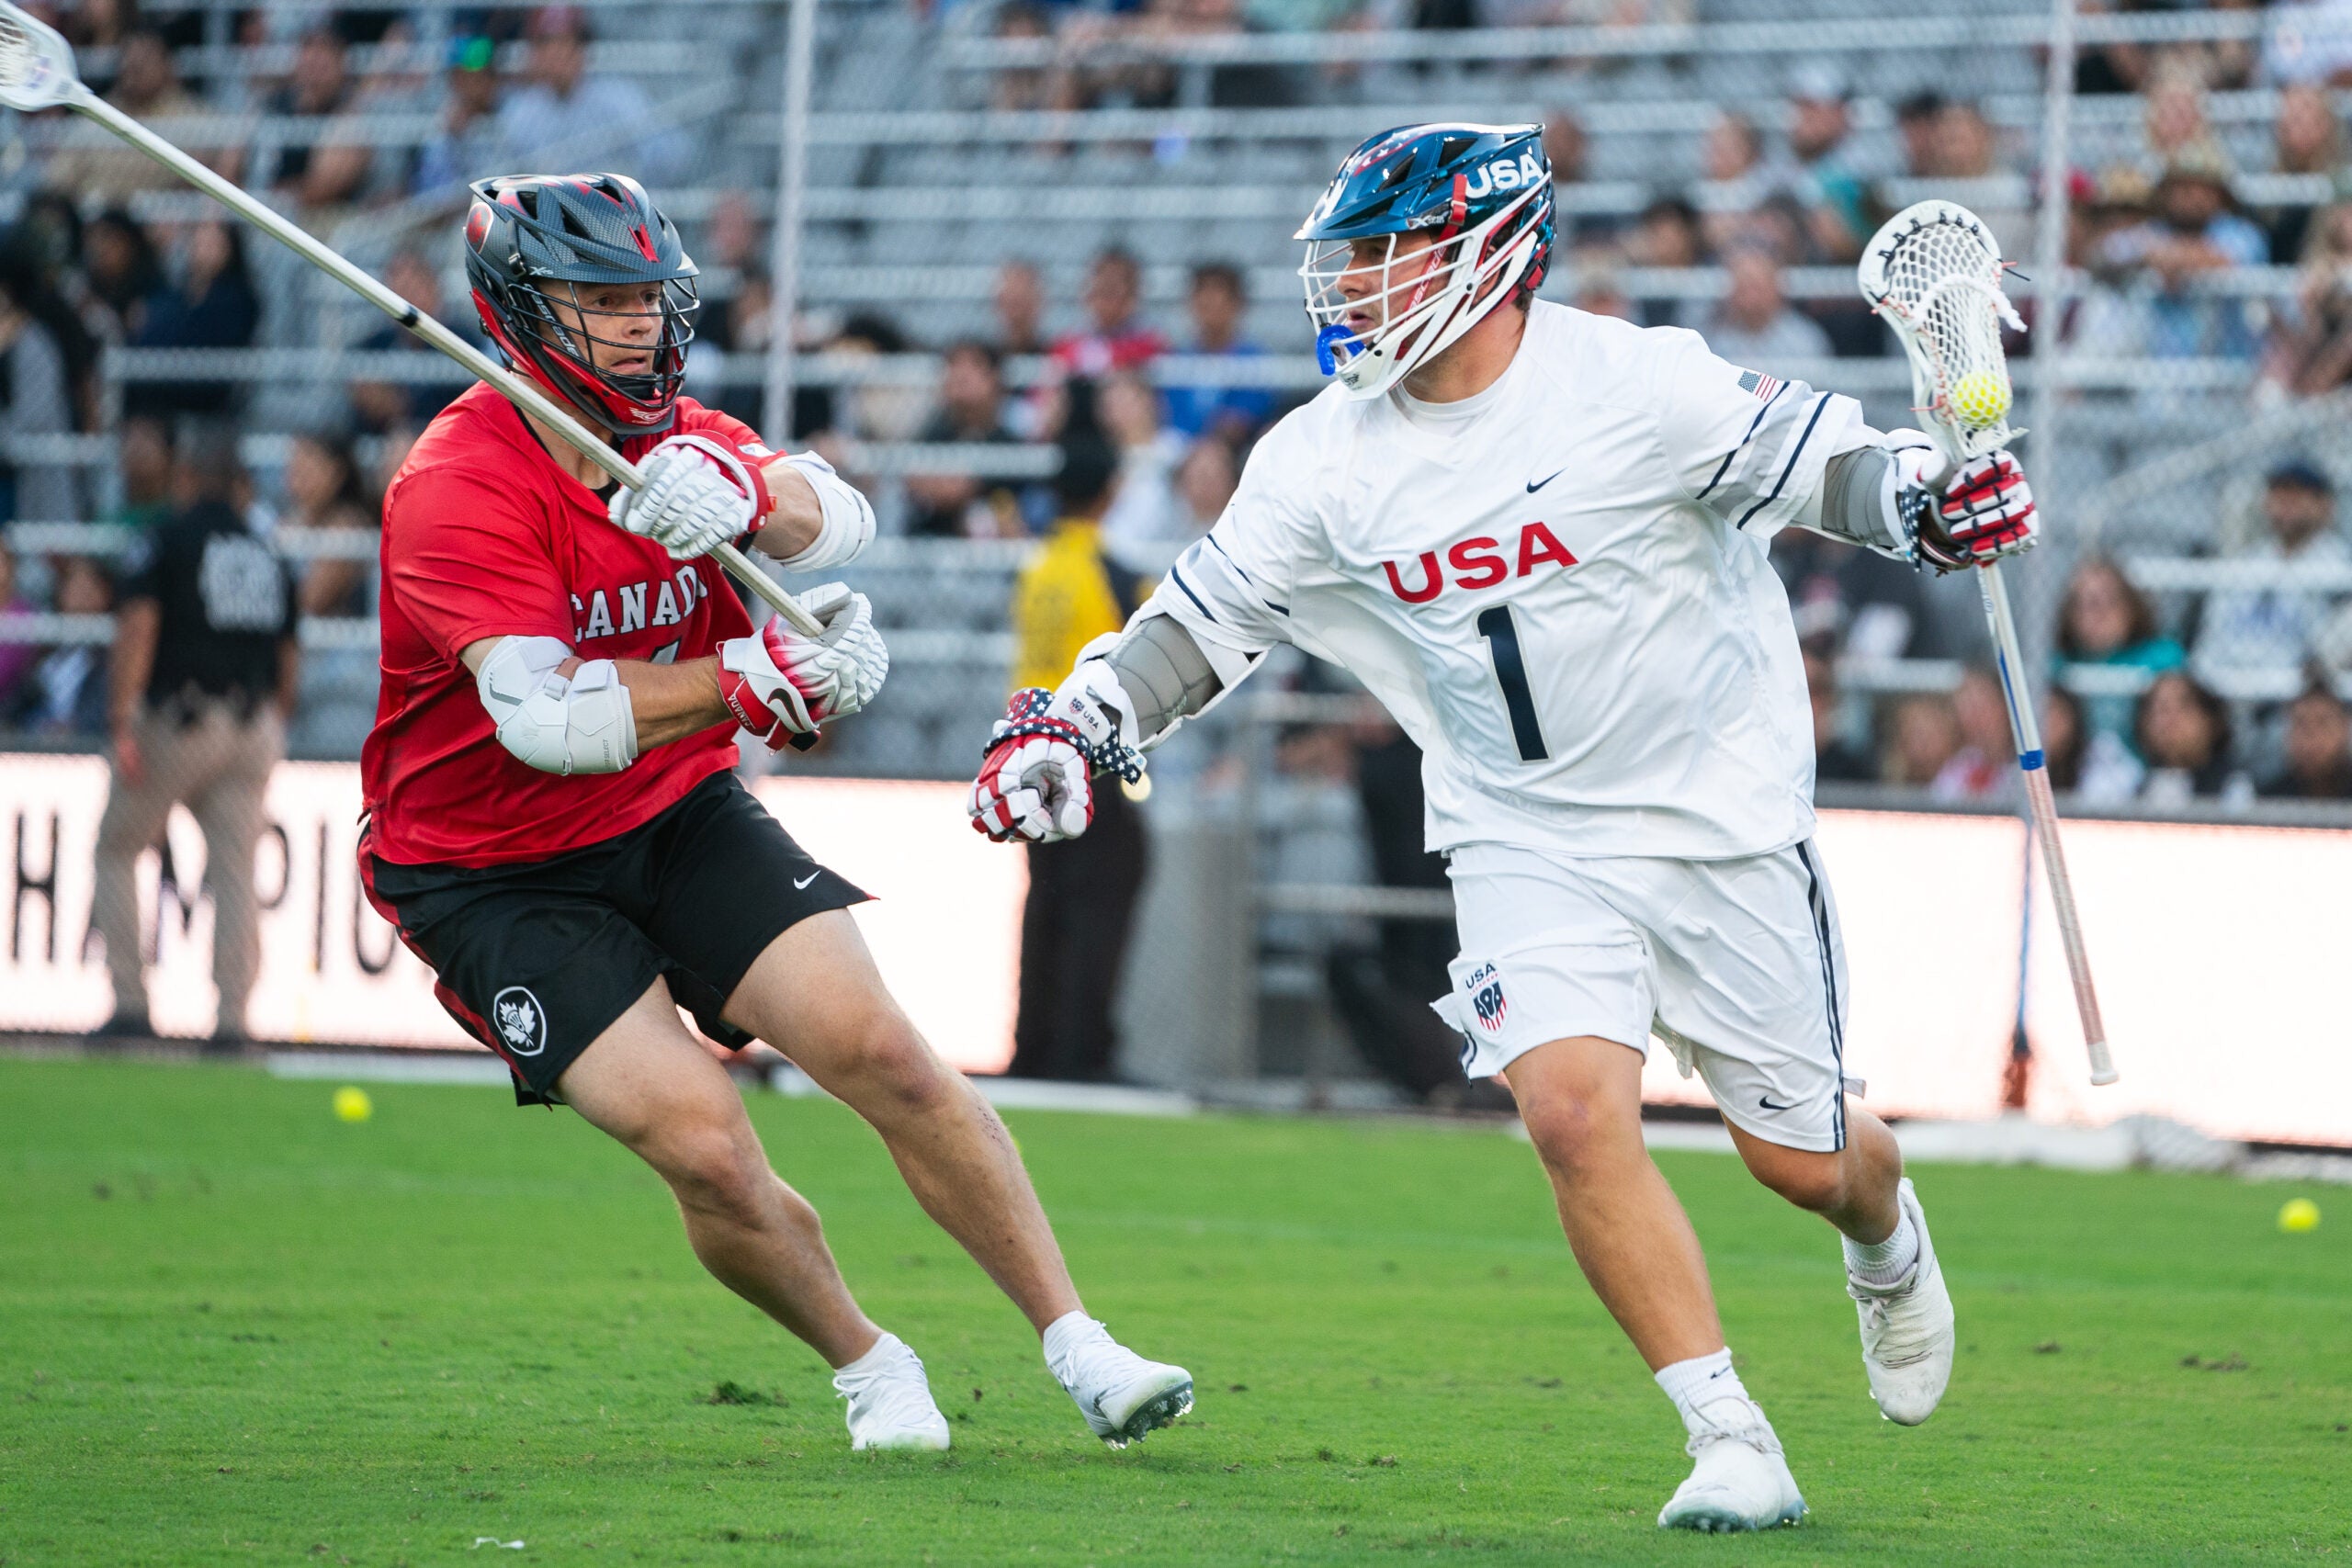 Team USA vs. Team Canada: World Lacrosse Gold Medal Game Preview